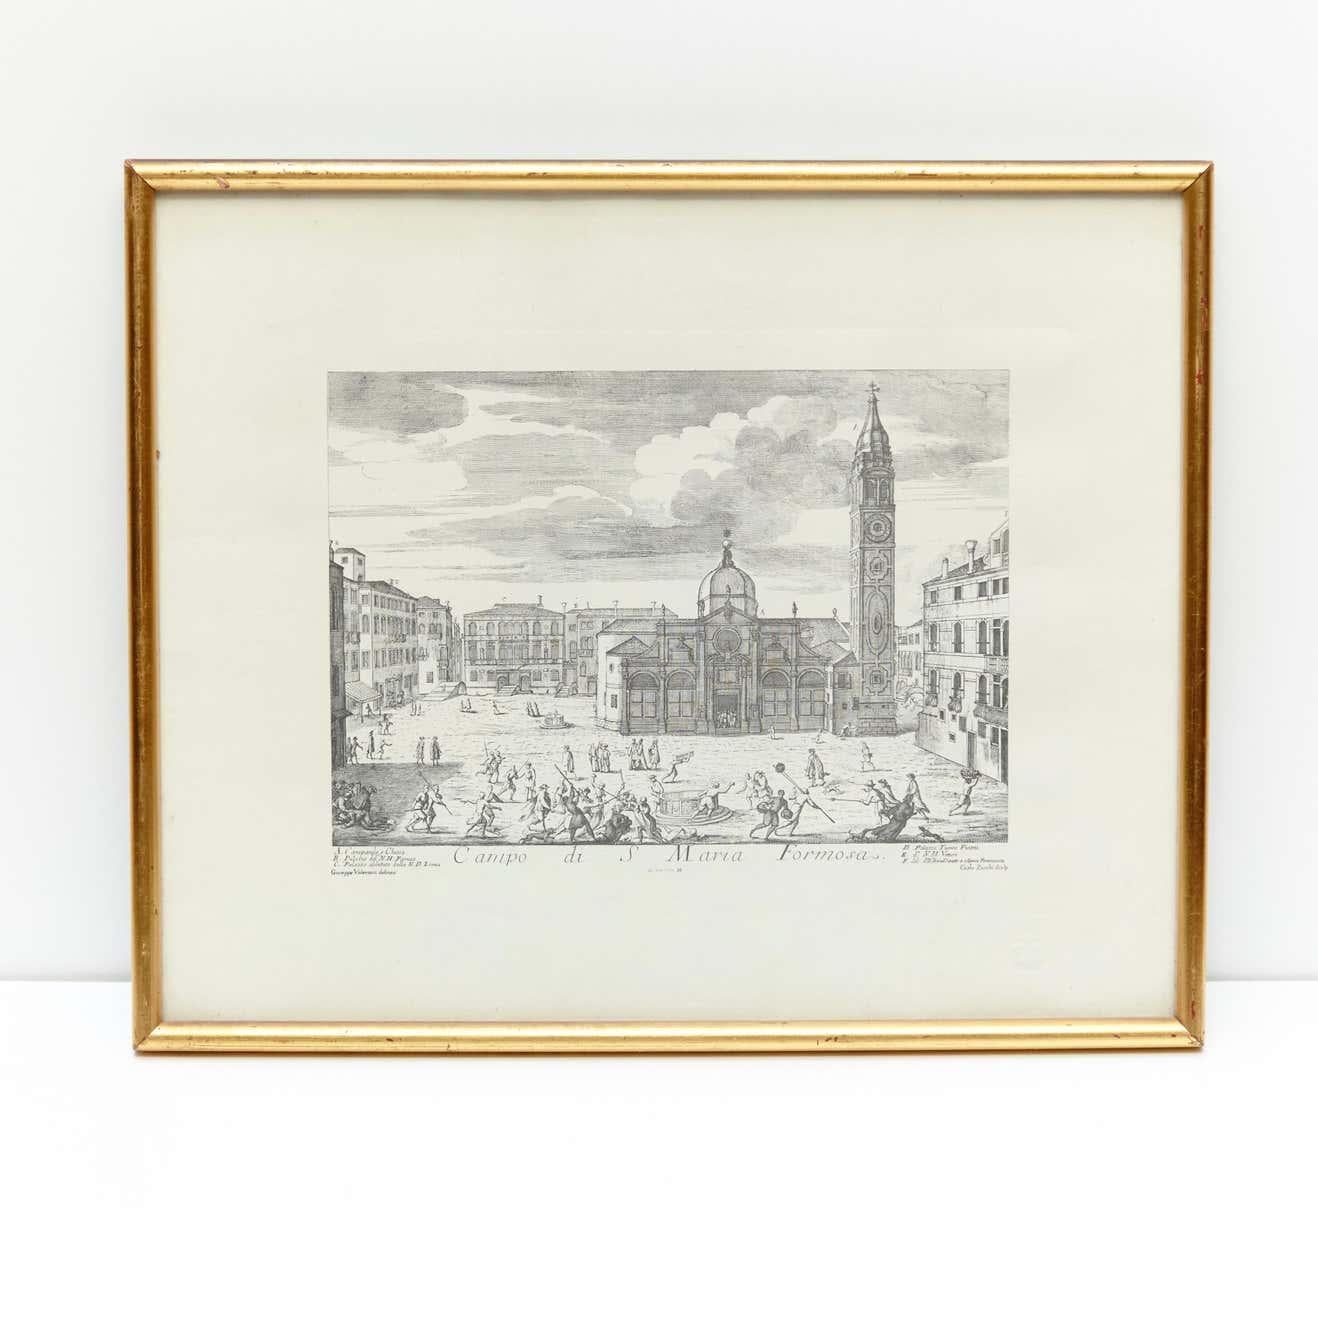 Early 20th century Venice print in black and white
By Carlo Zucchi and Giuseppe Valeriani.